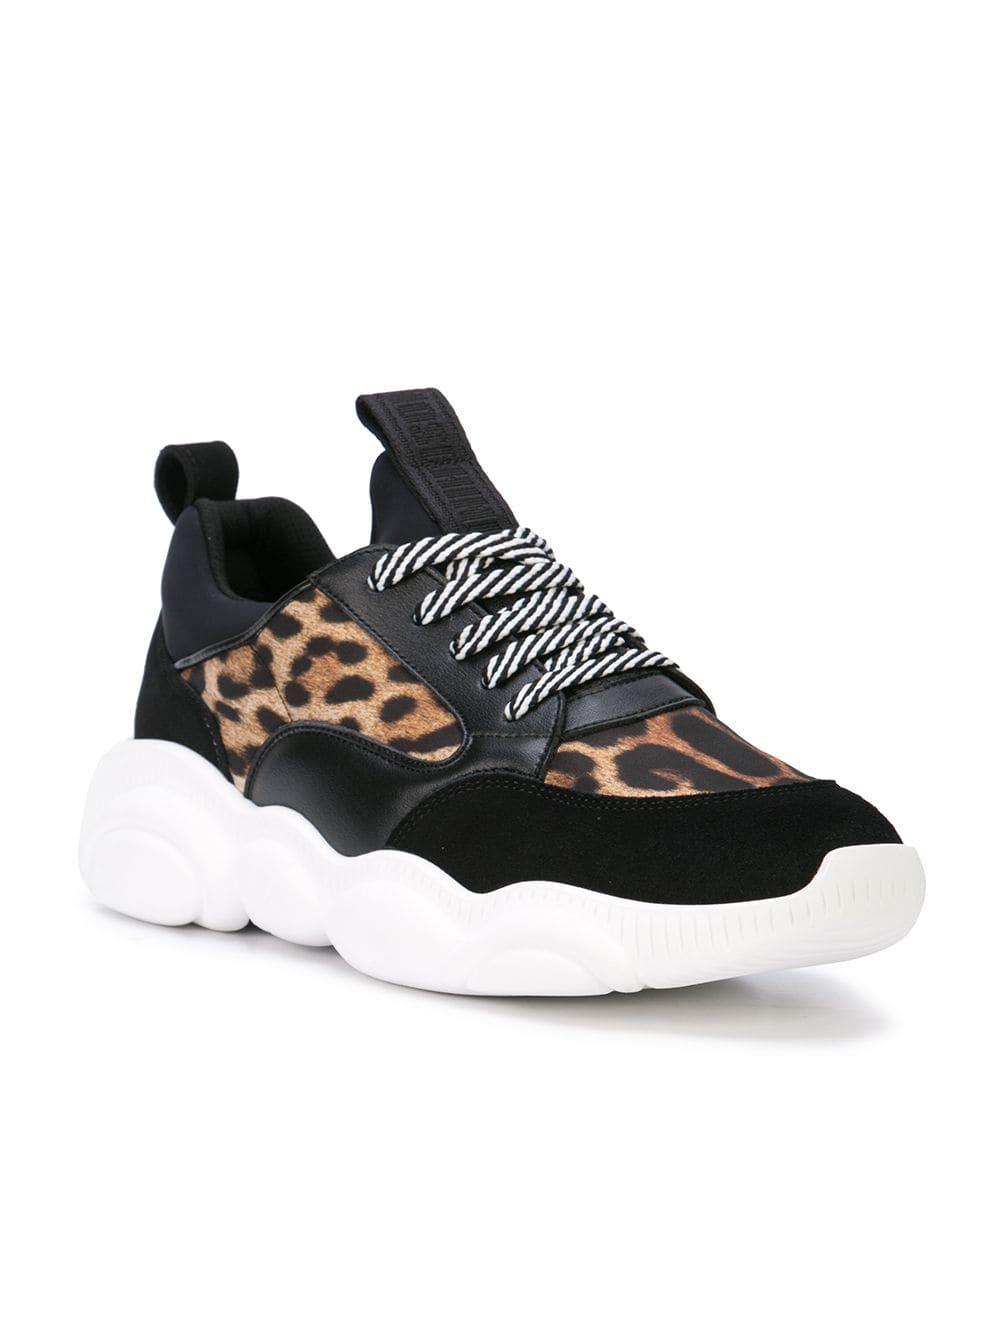 Moschino Leather Leopard Print Trainers 